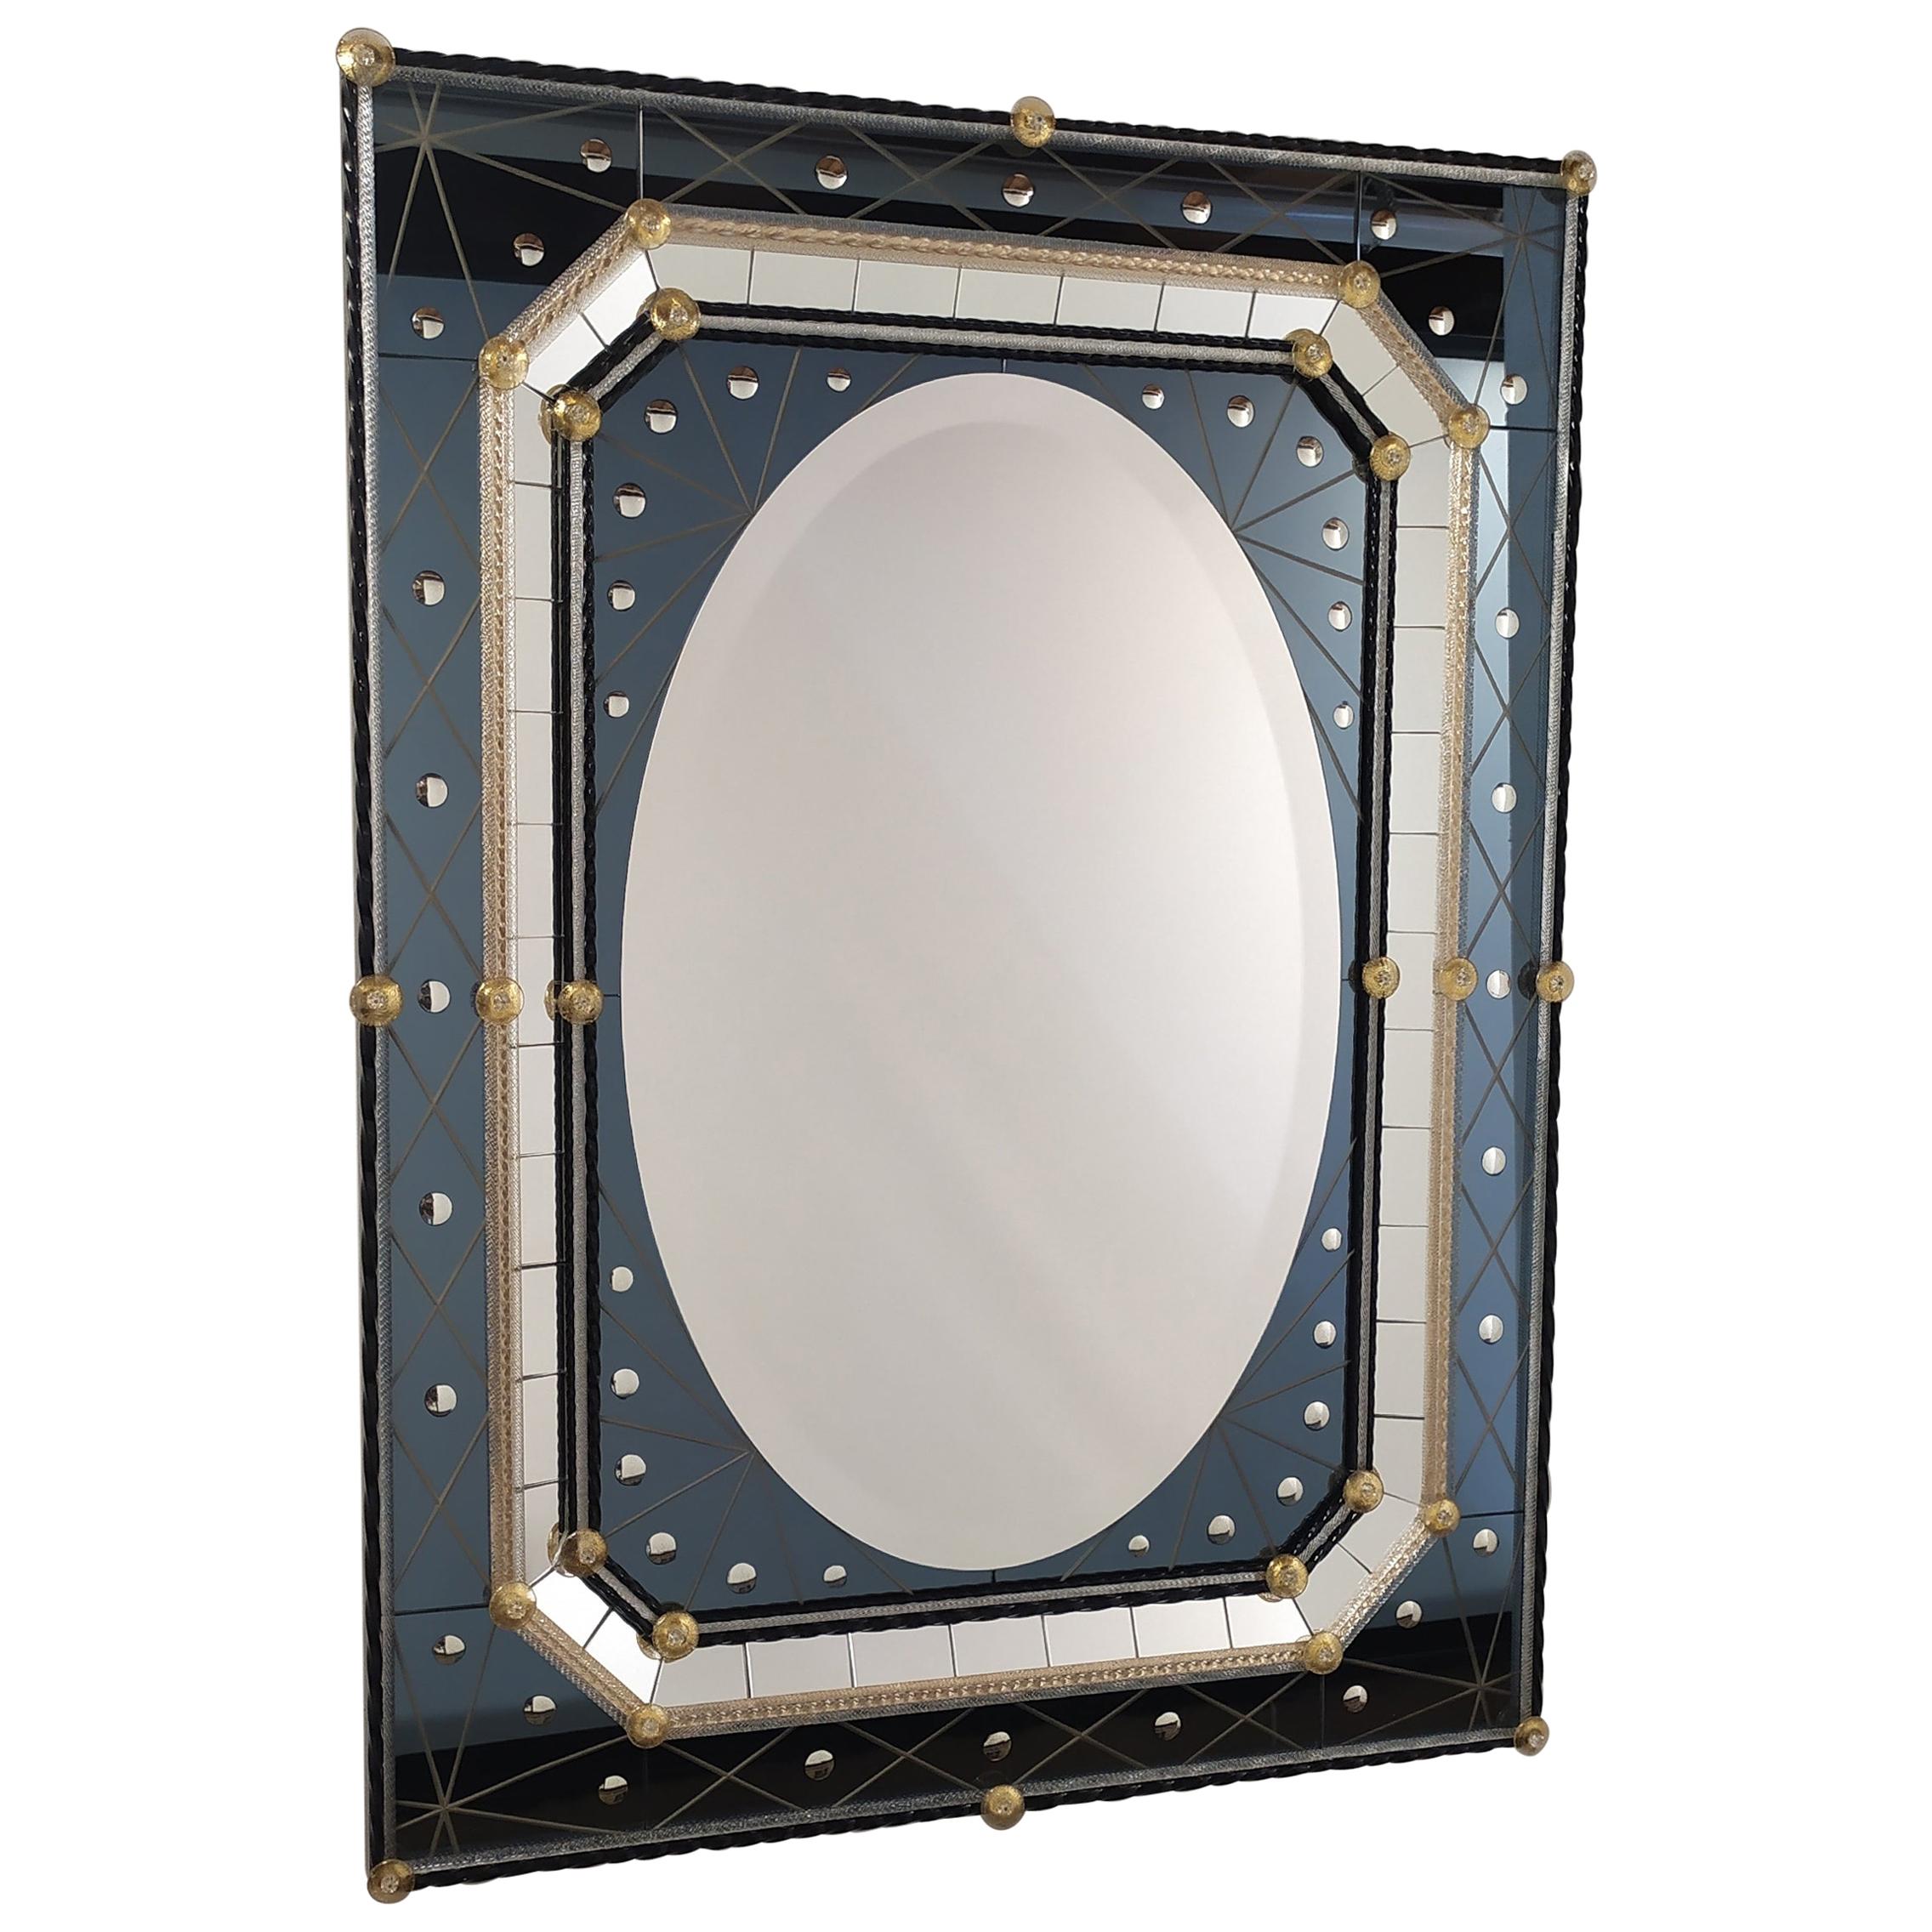 Murano Glass Mirror with Polished Bubbles Engraving on Steel-Colored Mirror For Sale